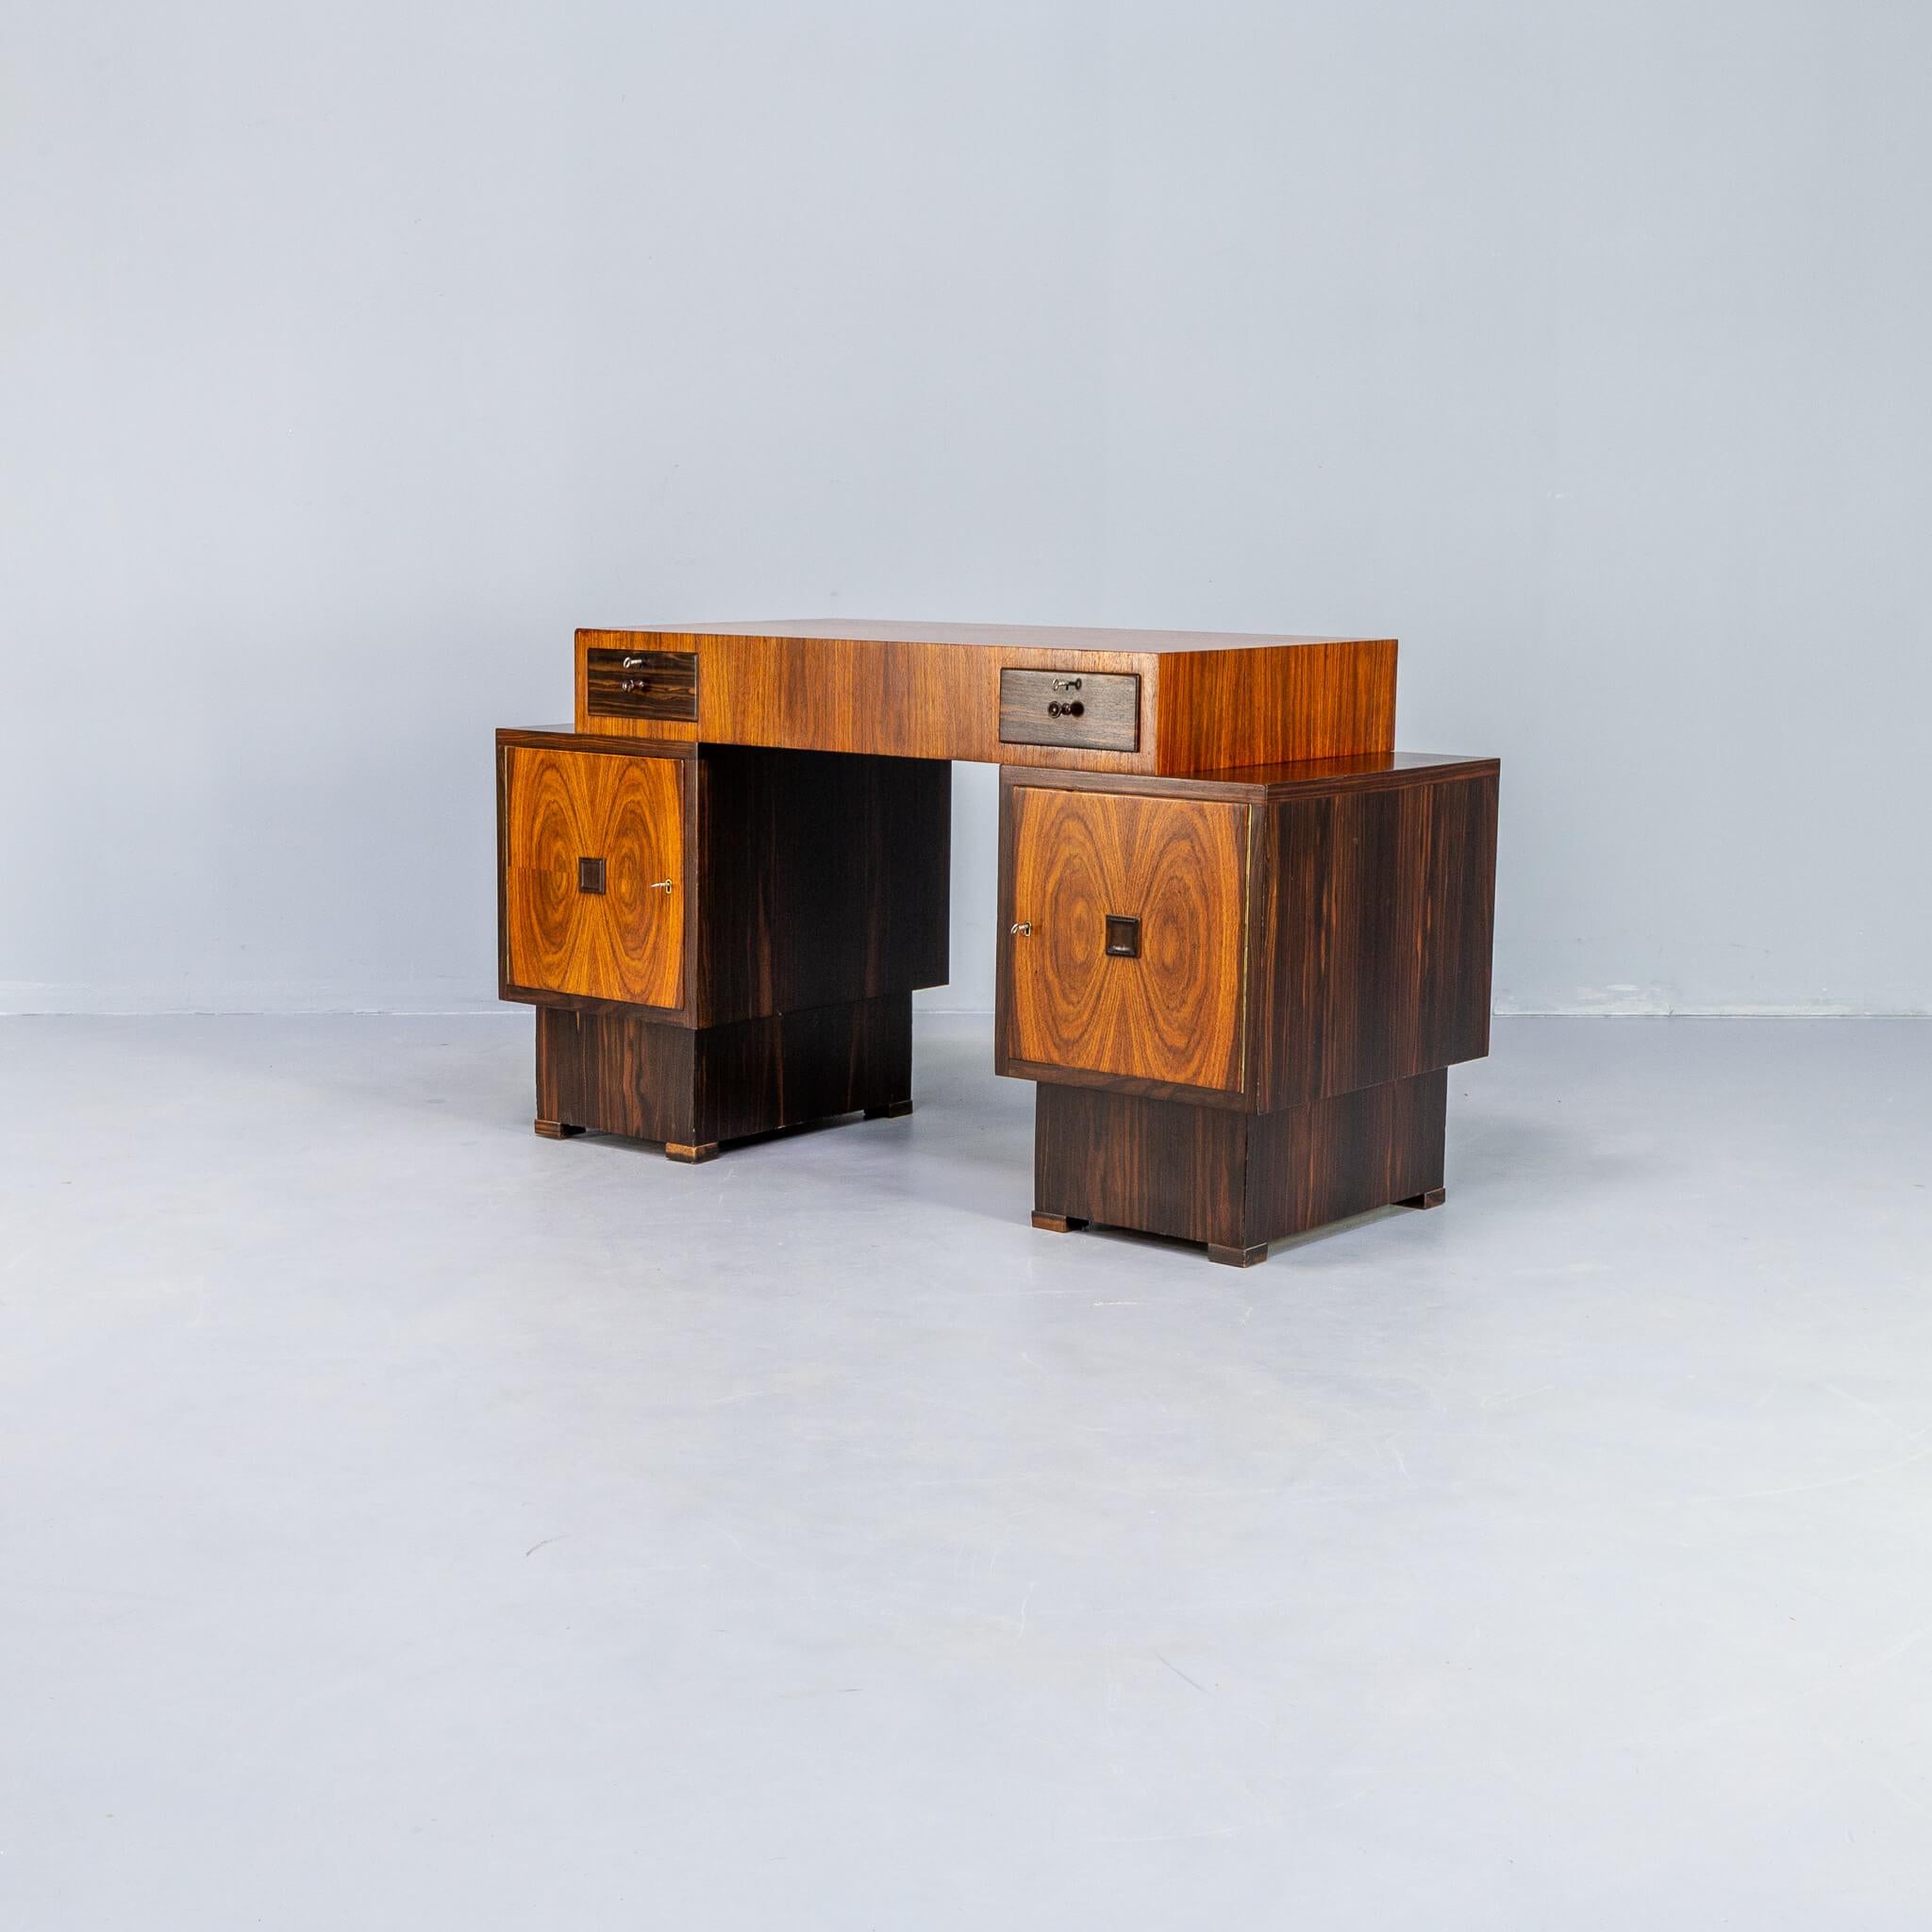 Mid-20th Century Anton Hamaker Art Deco Writing Desk from the Amsterdam School for ‘t Woonhuys For Sale